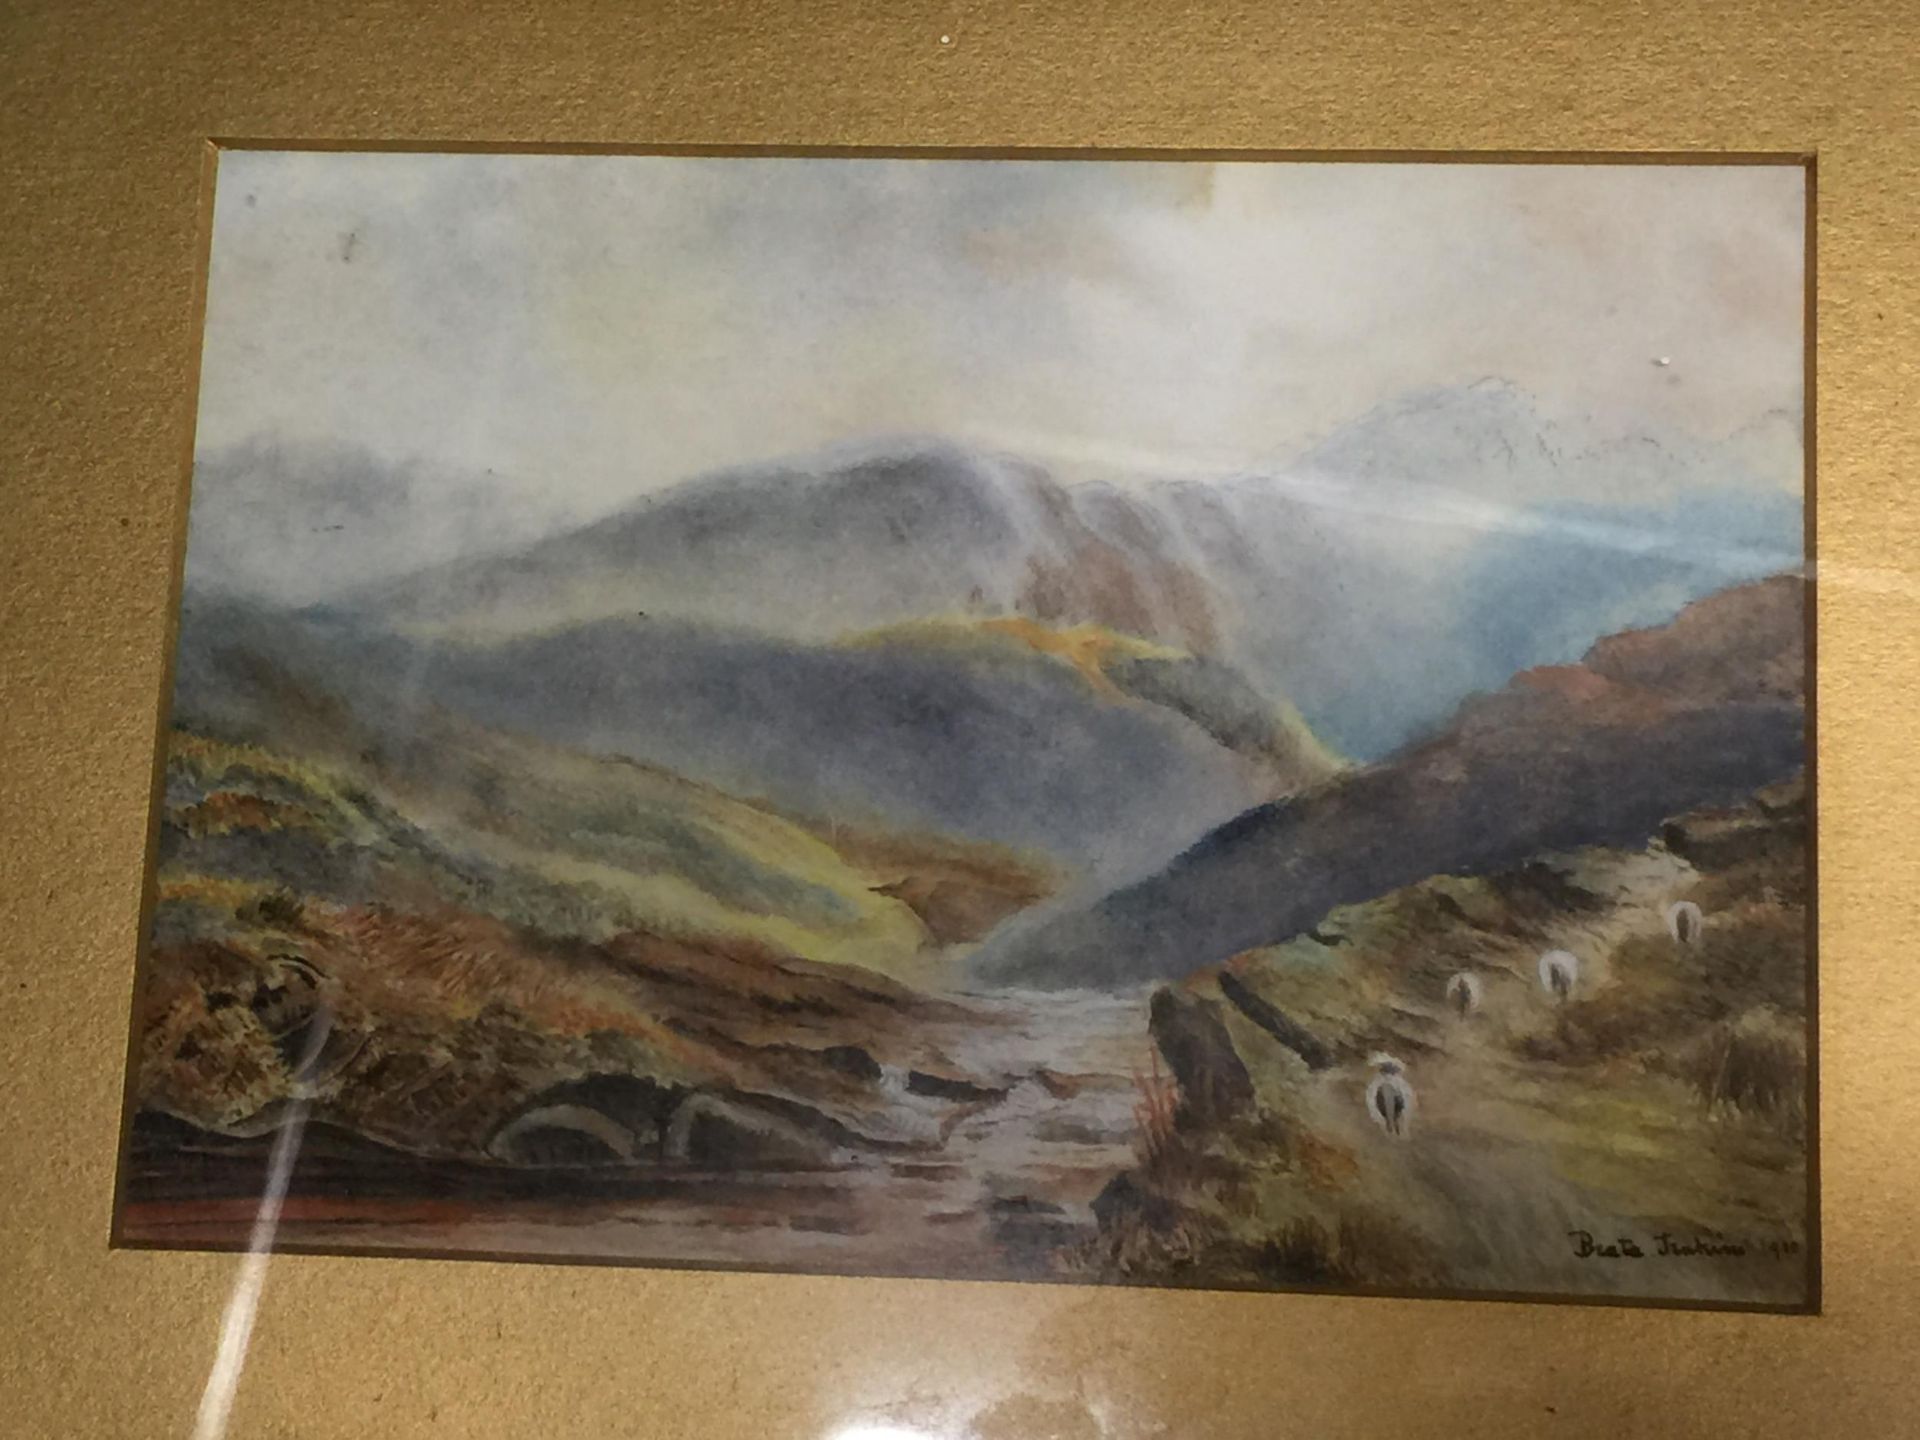 A QUANLITY FRAMED WATERCOLOUR 'SHEEP IN THE HILLS' SIGNED B JENKINS 1910 - Image 2 of 3